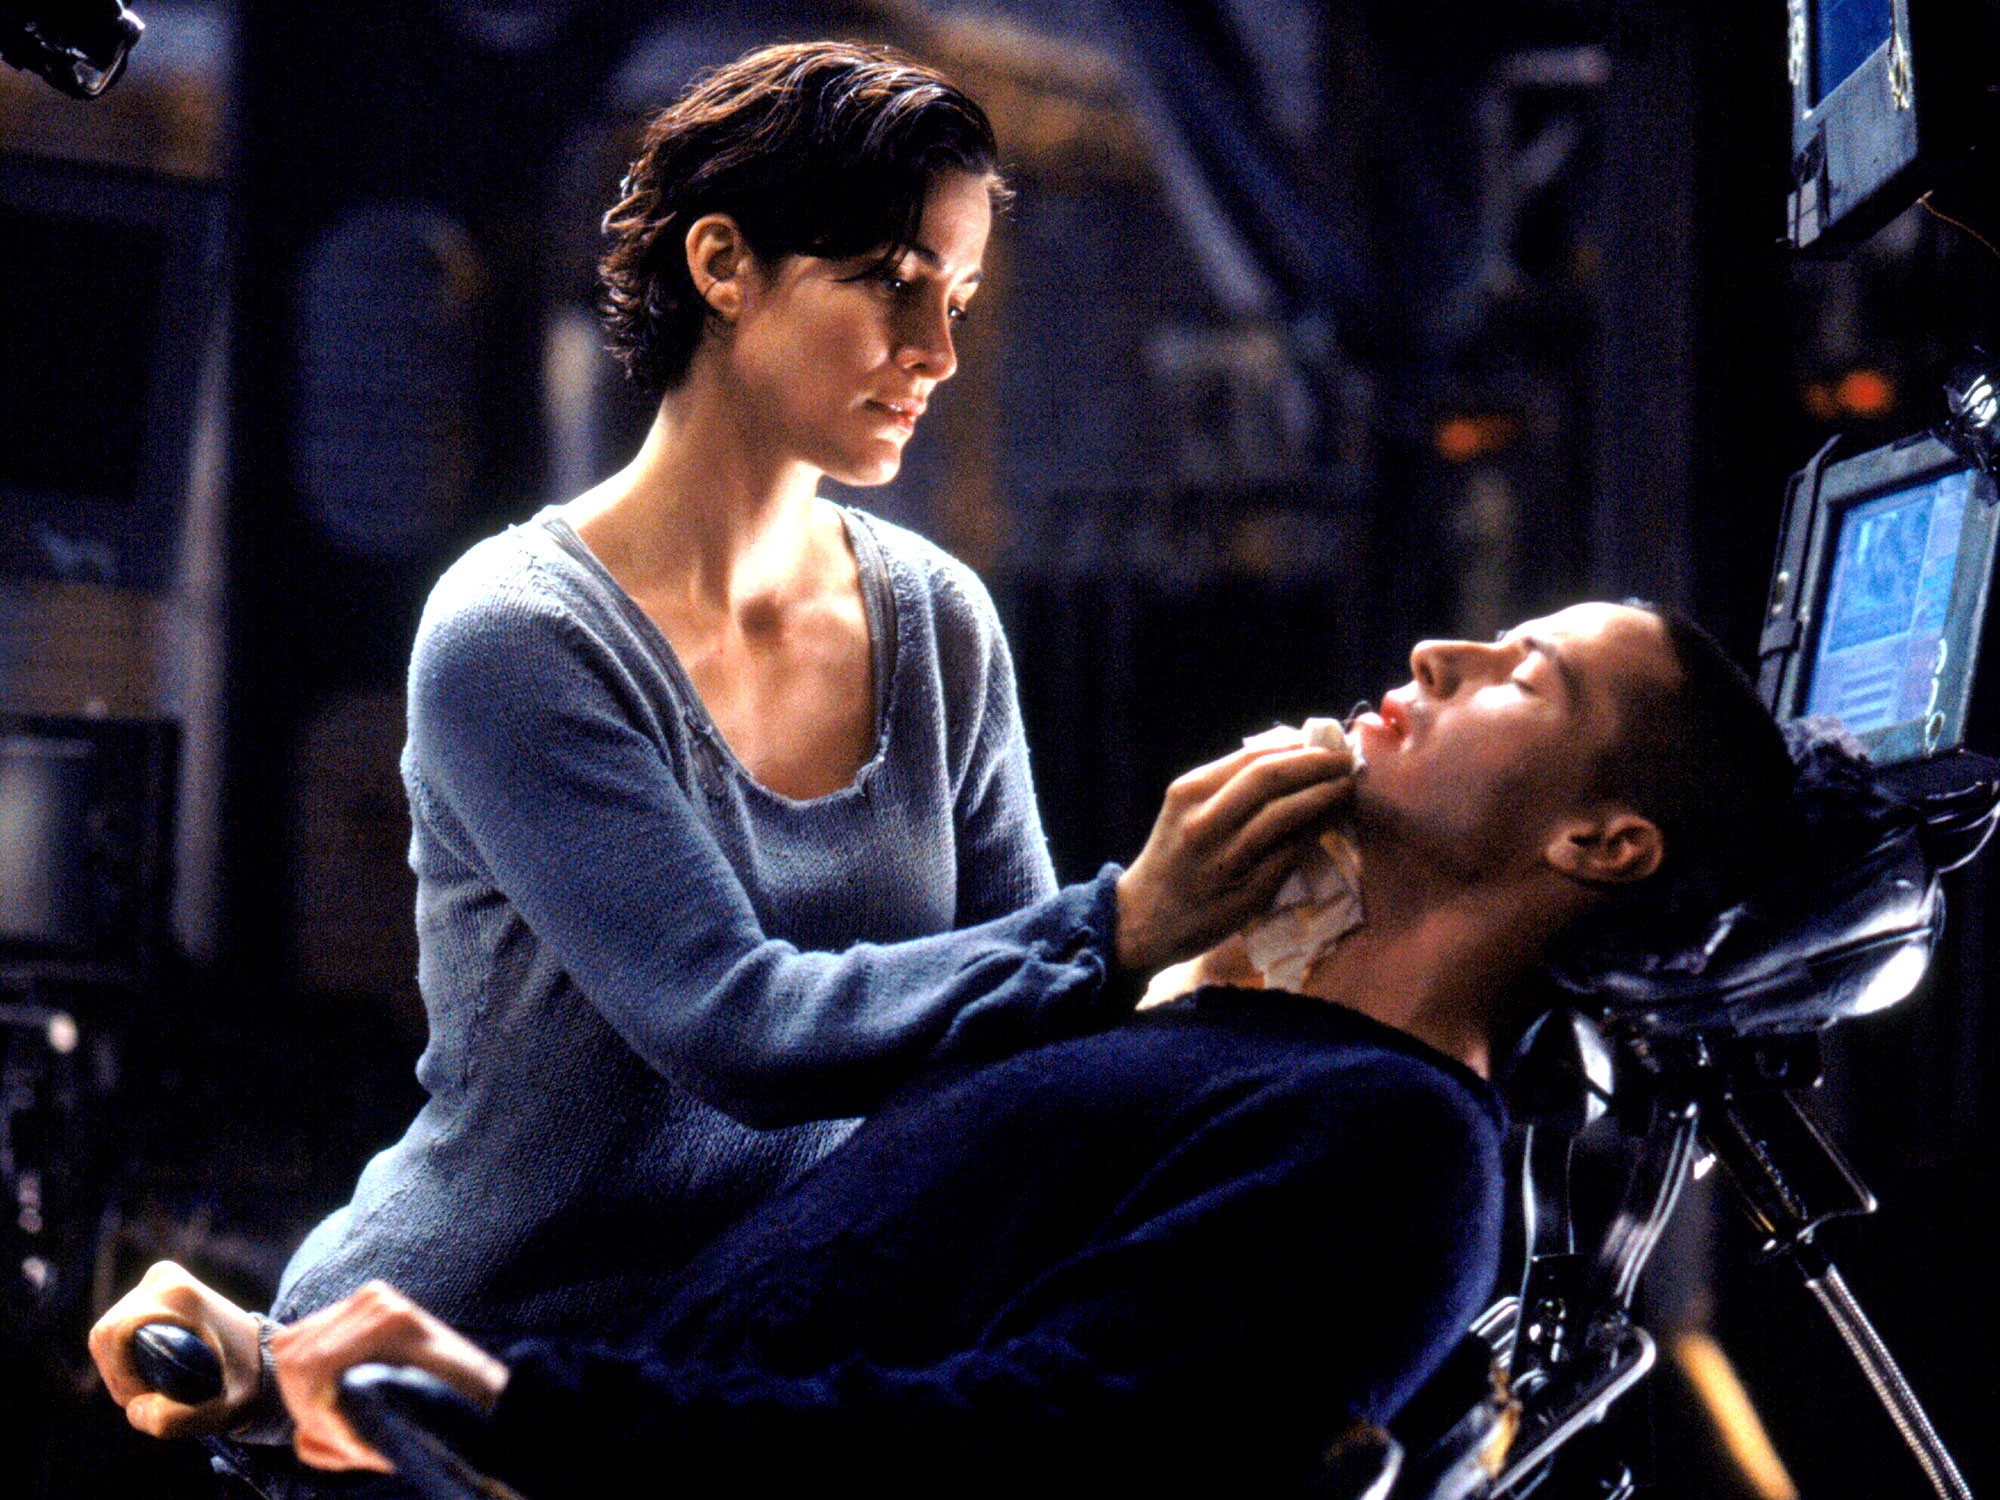 Keanu Reeves and Carrie-Anne Moss in The Matrix (1999)